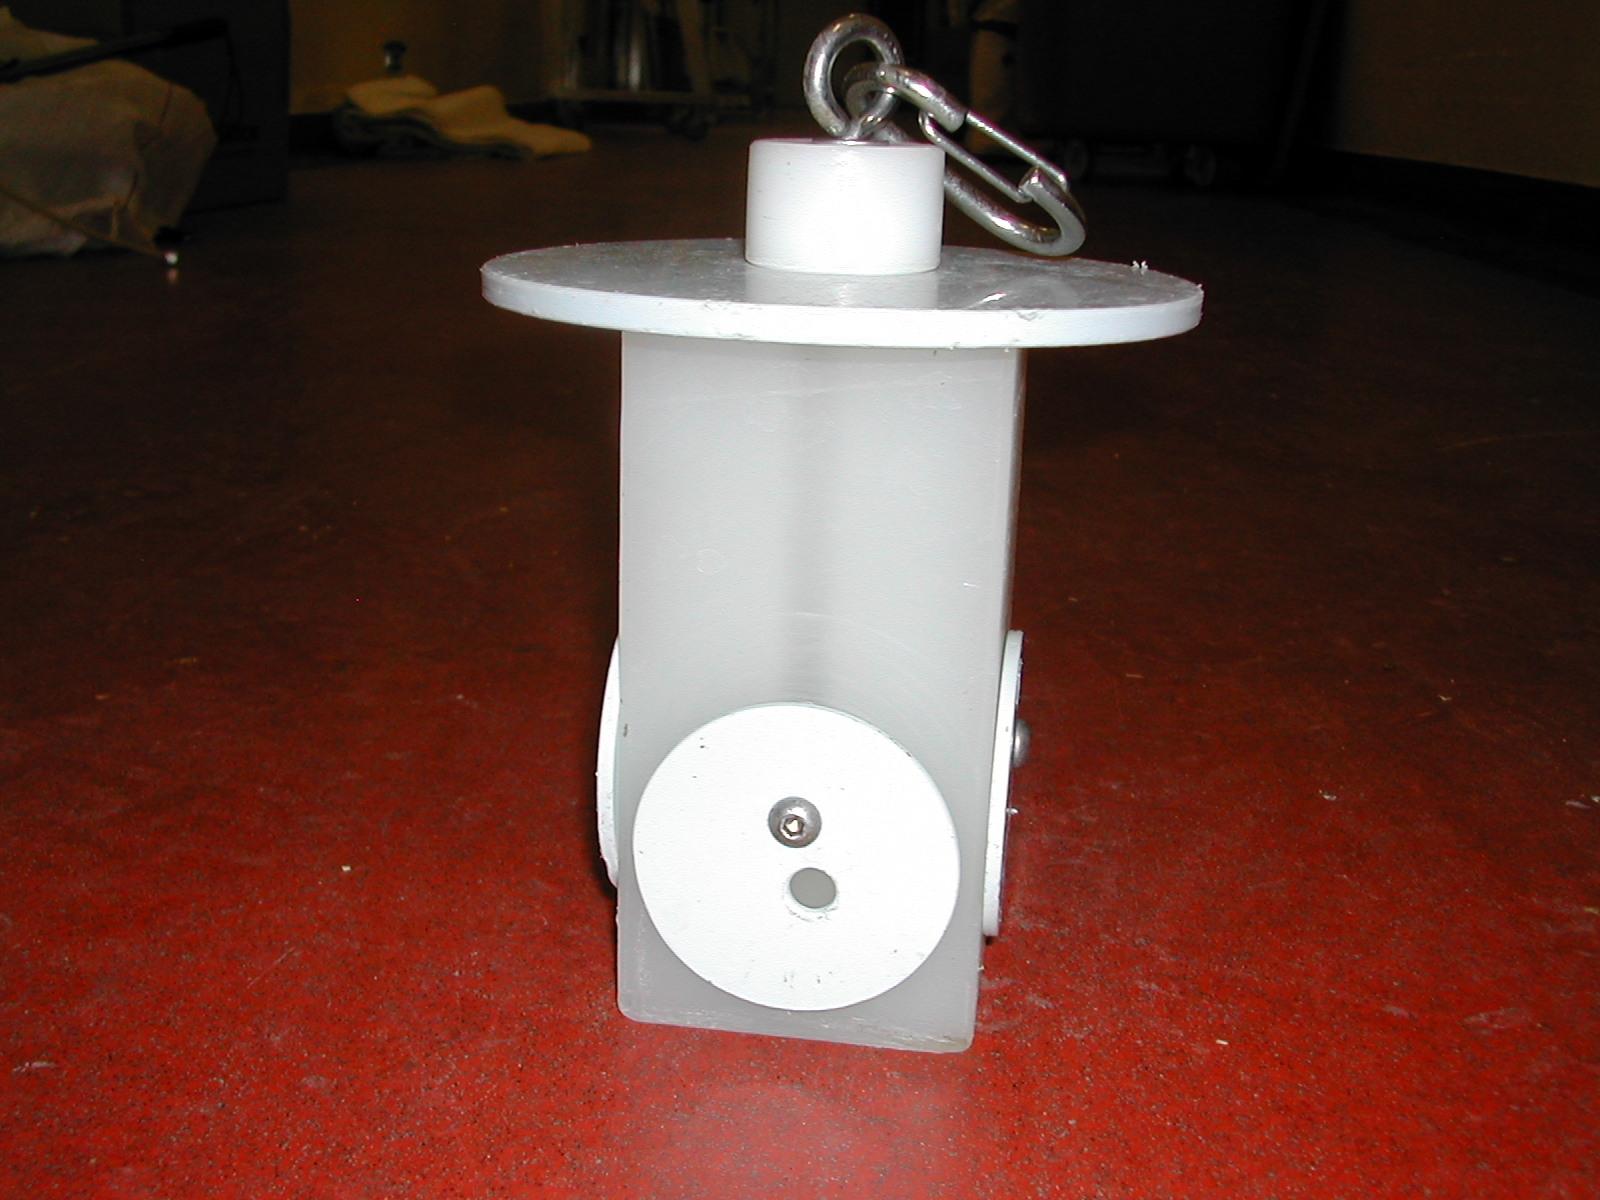 Example of a puzzle feeder made from plastic where monkeys are required to swivel pieces of plastic around to access food